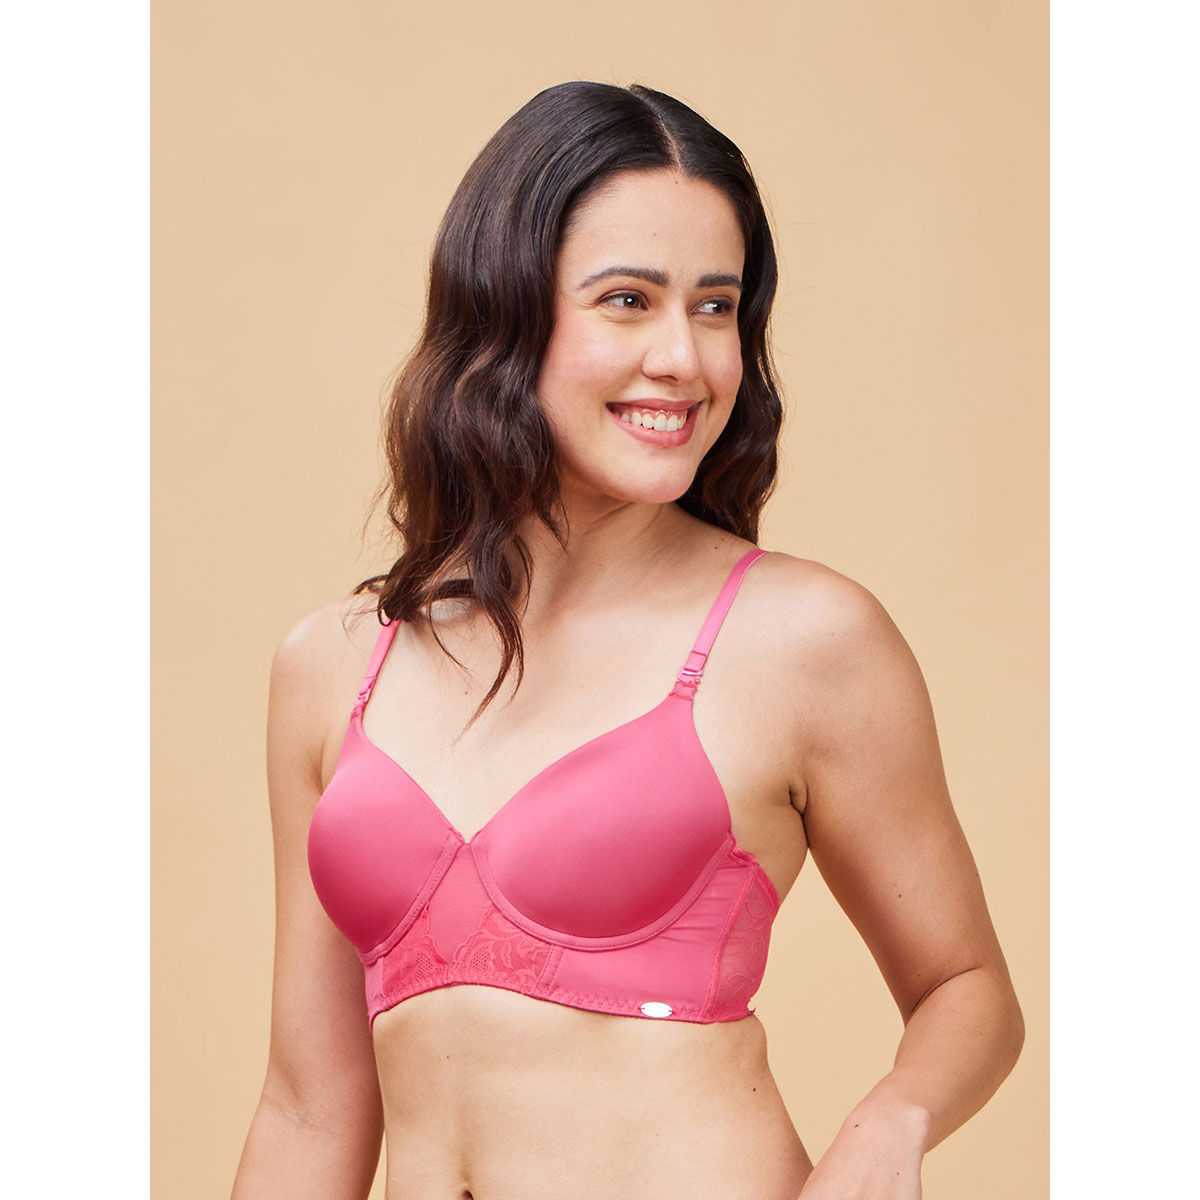 Enamor AB80 Cotton, Spandex Full Coverage T-Shirt Bra (36C, Black) in  Yamunanagar at best price by Perfect Look Brassiere - Justdial